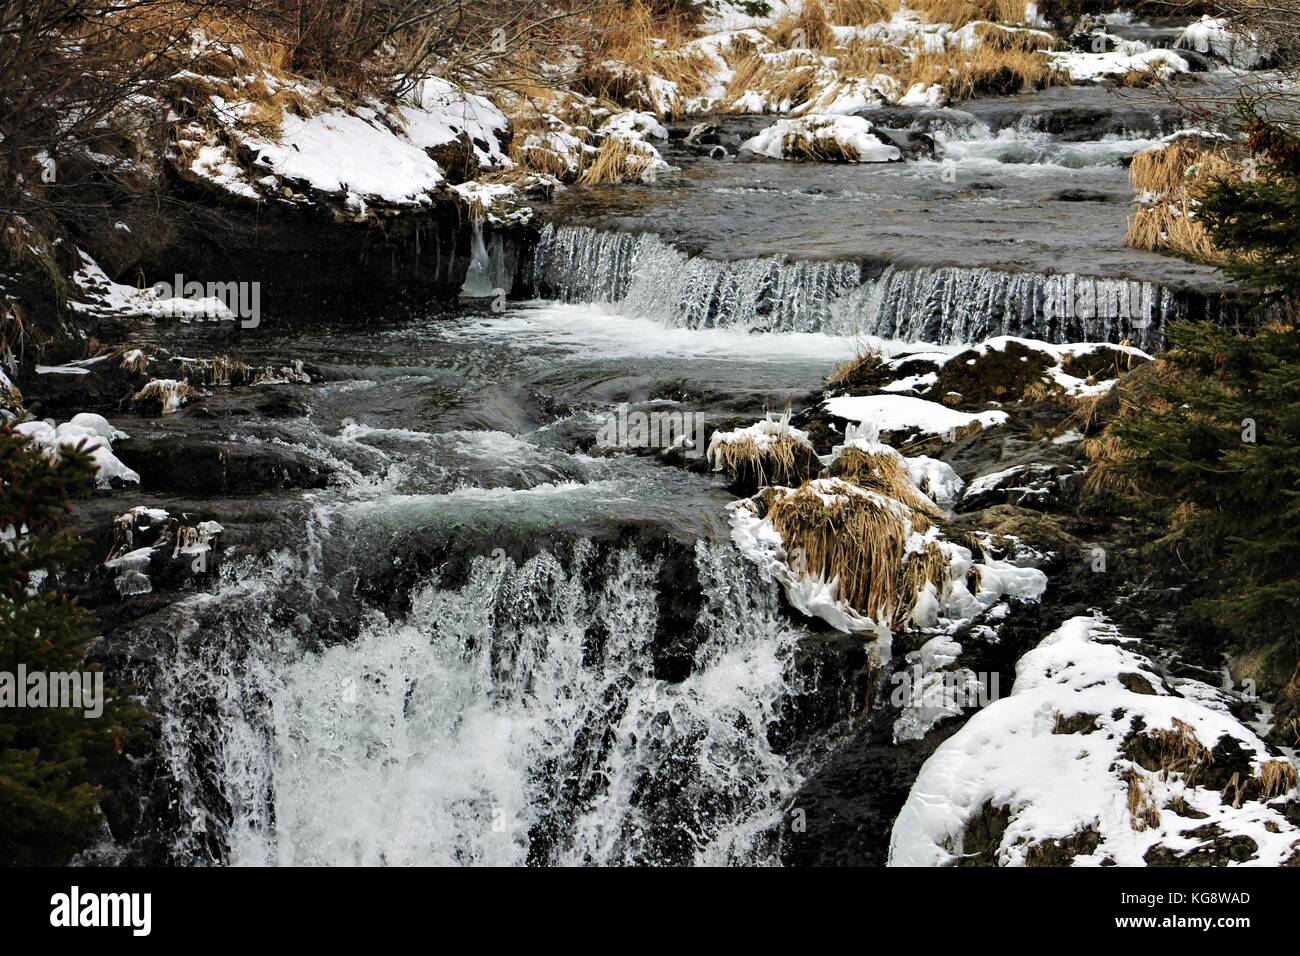 Three small waterfalls on the Virginia River, St. John's, Newfoundland, Canada. Snow on the river banks. Water is grey and cold looking Stock Photo